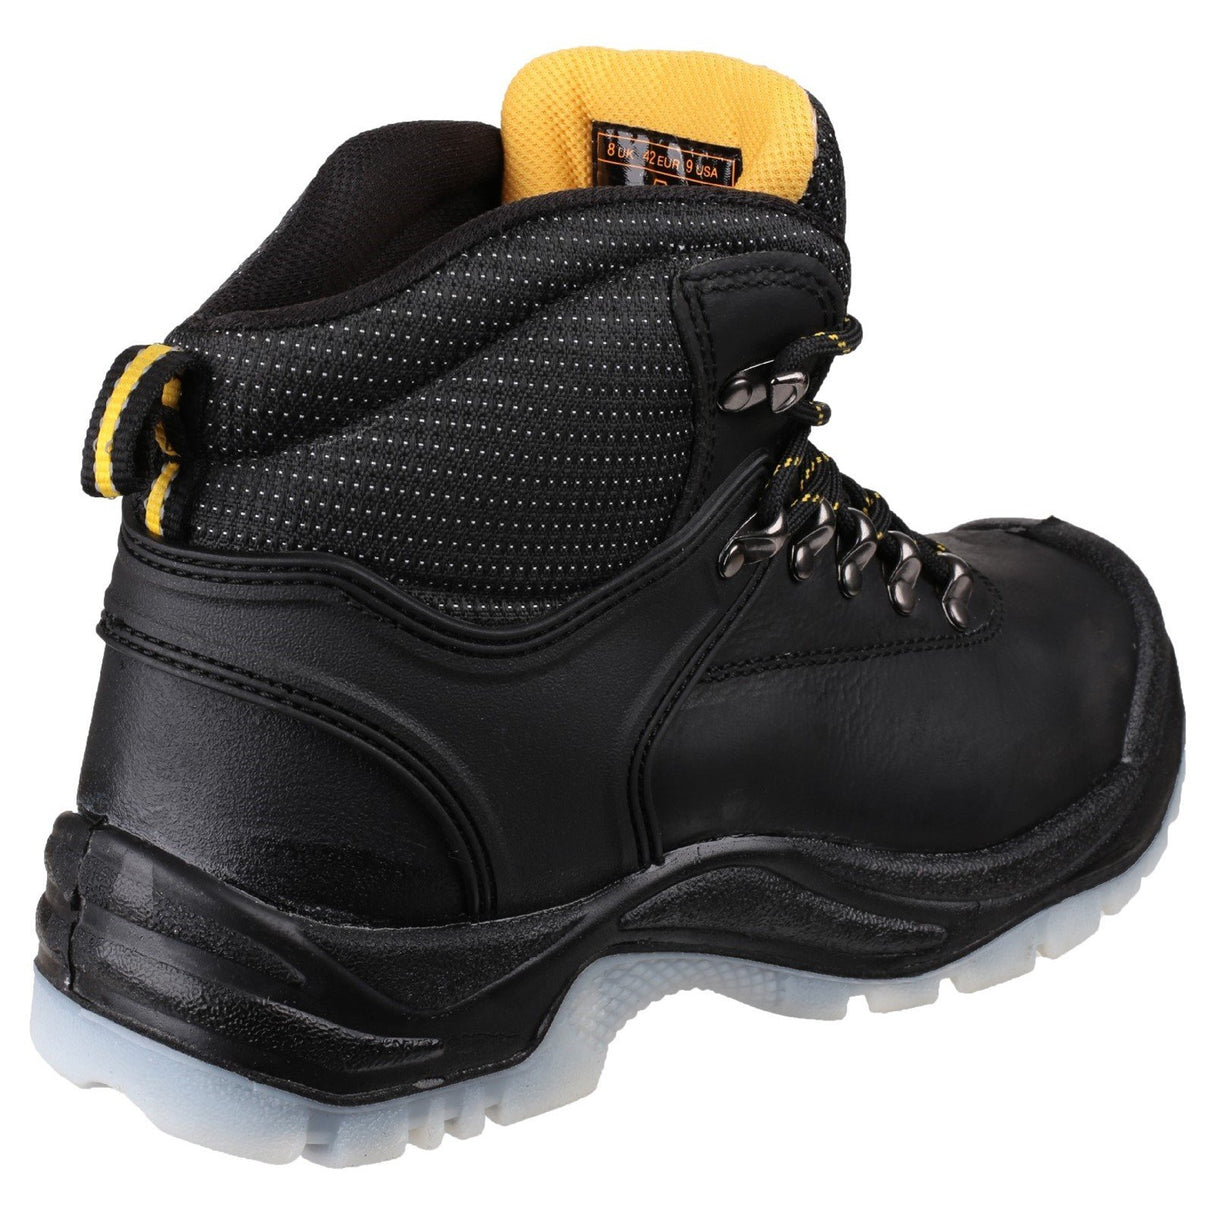 Amblers Safety Antistatic Lace Up Hiker Safety Boots